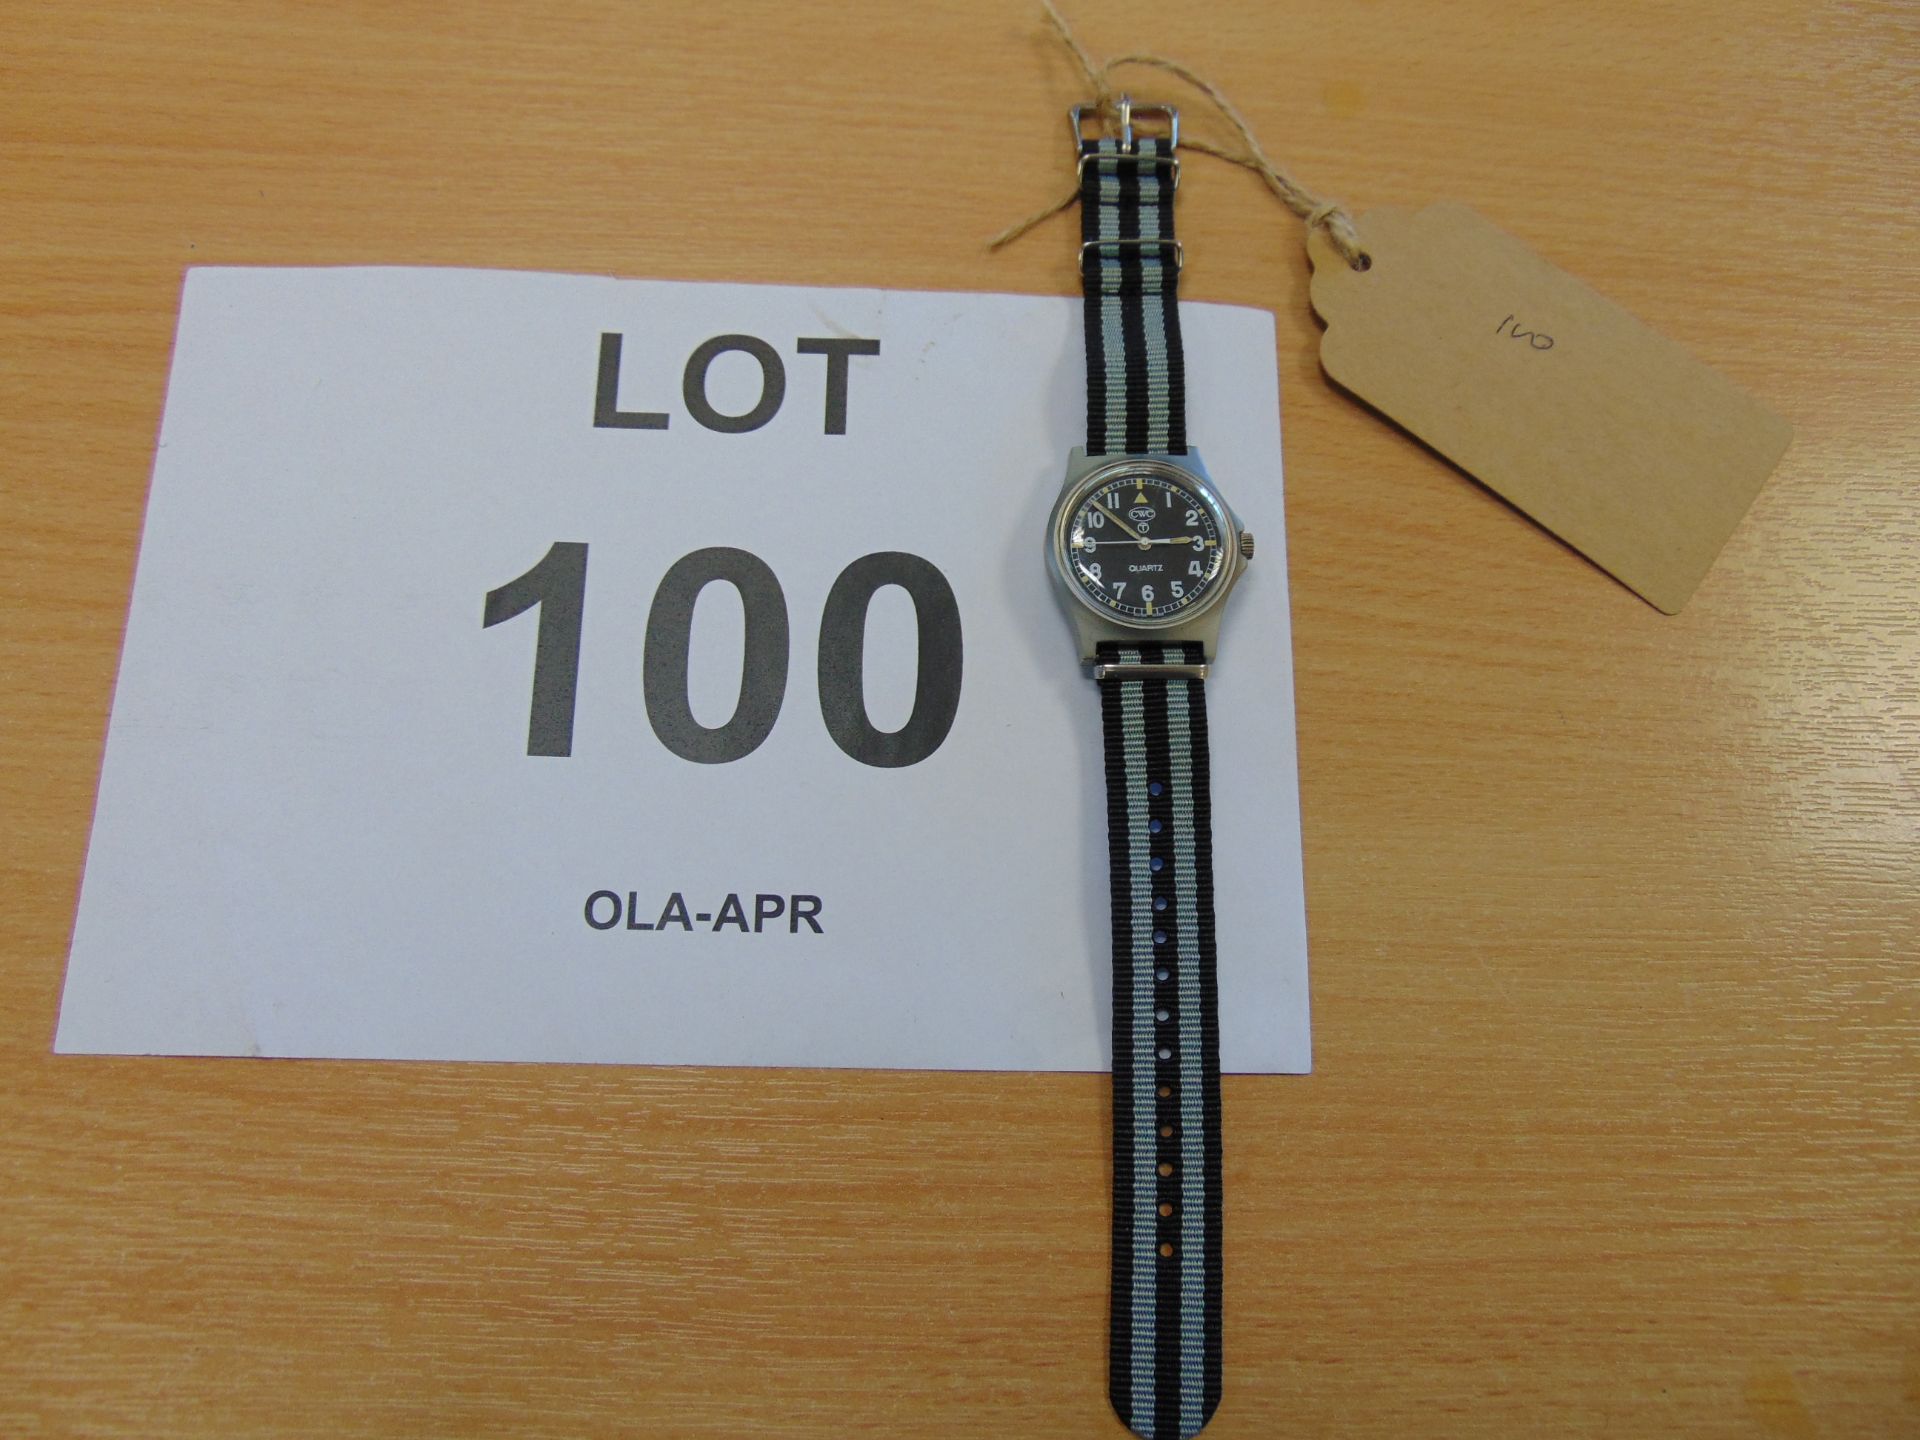 CWC W10 British Army Service Watch Unissued Condition, Water Resistant to 5ATM, Date 2005